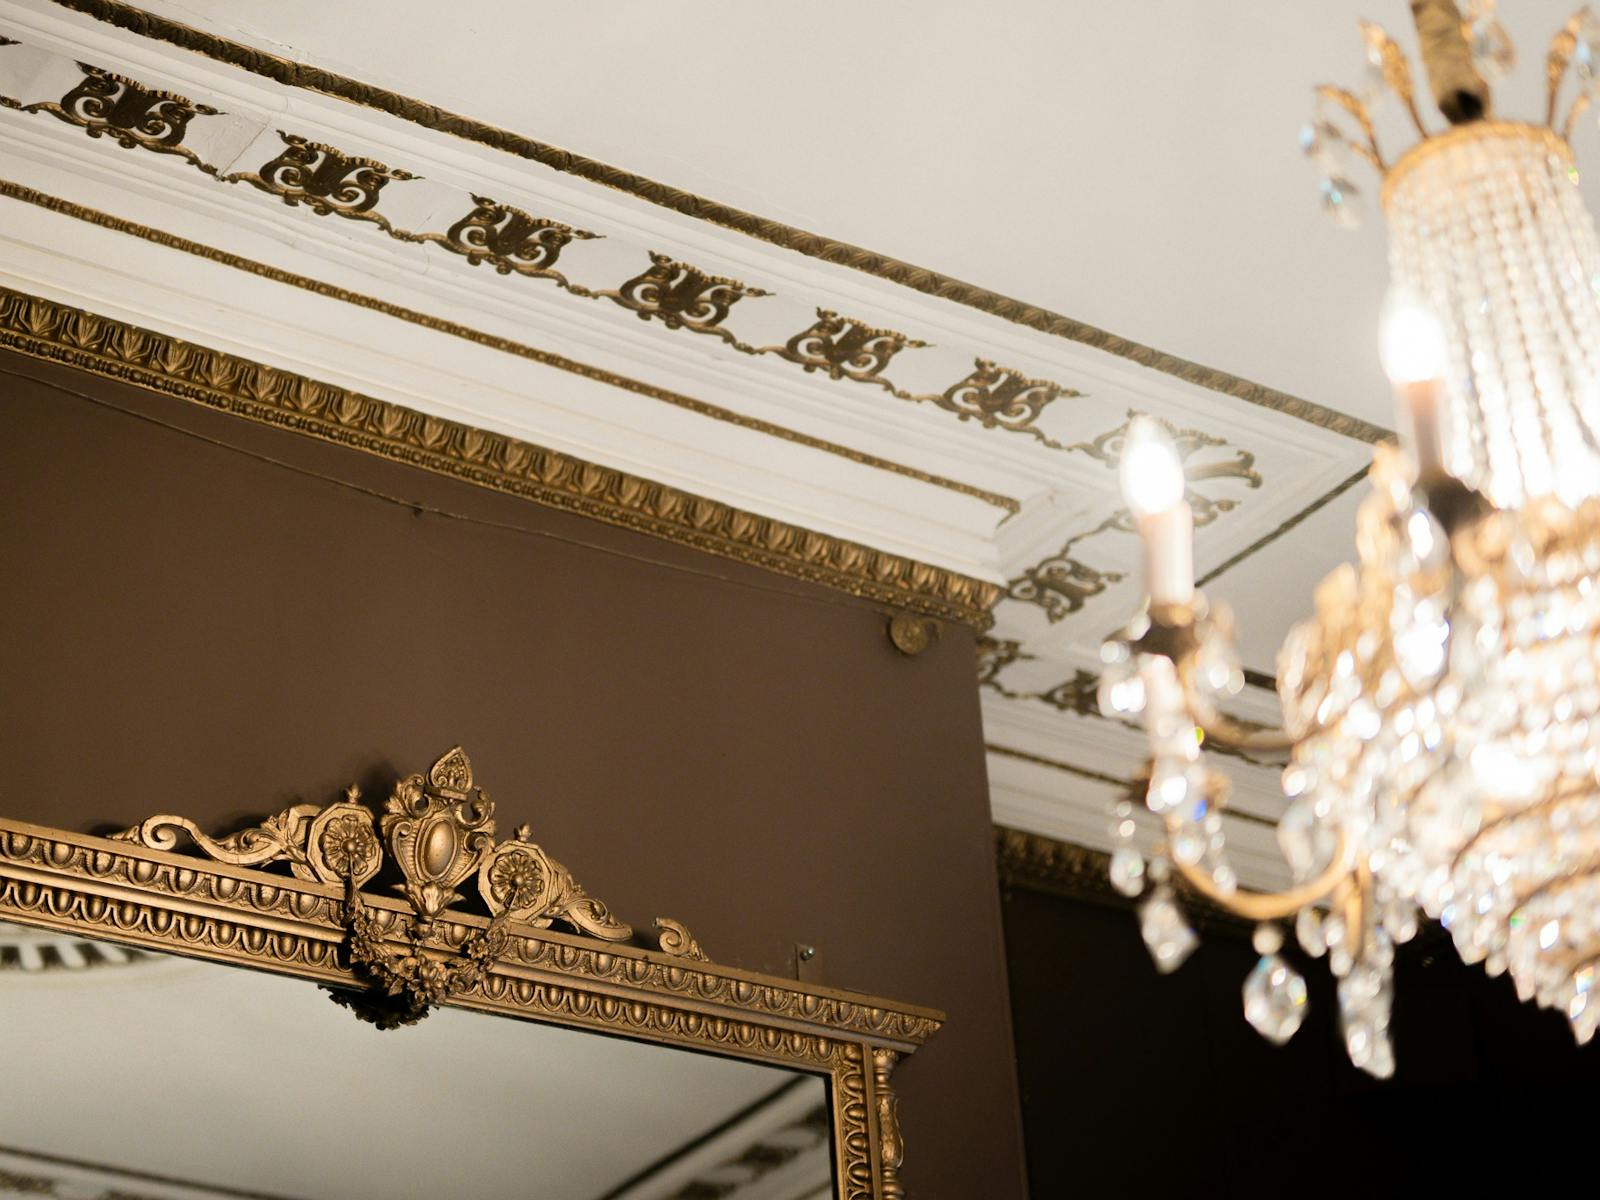 White ceiling with gold gilded cornicing details, and an ornate golf framed mirror on a brown wall